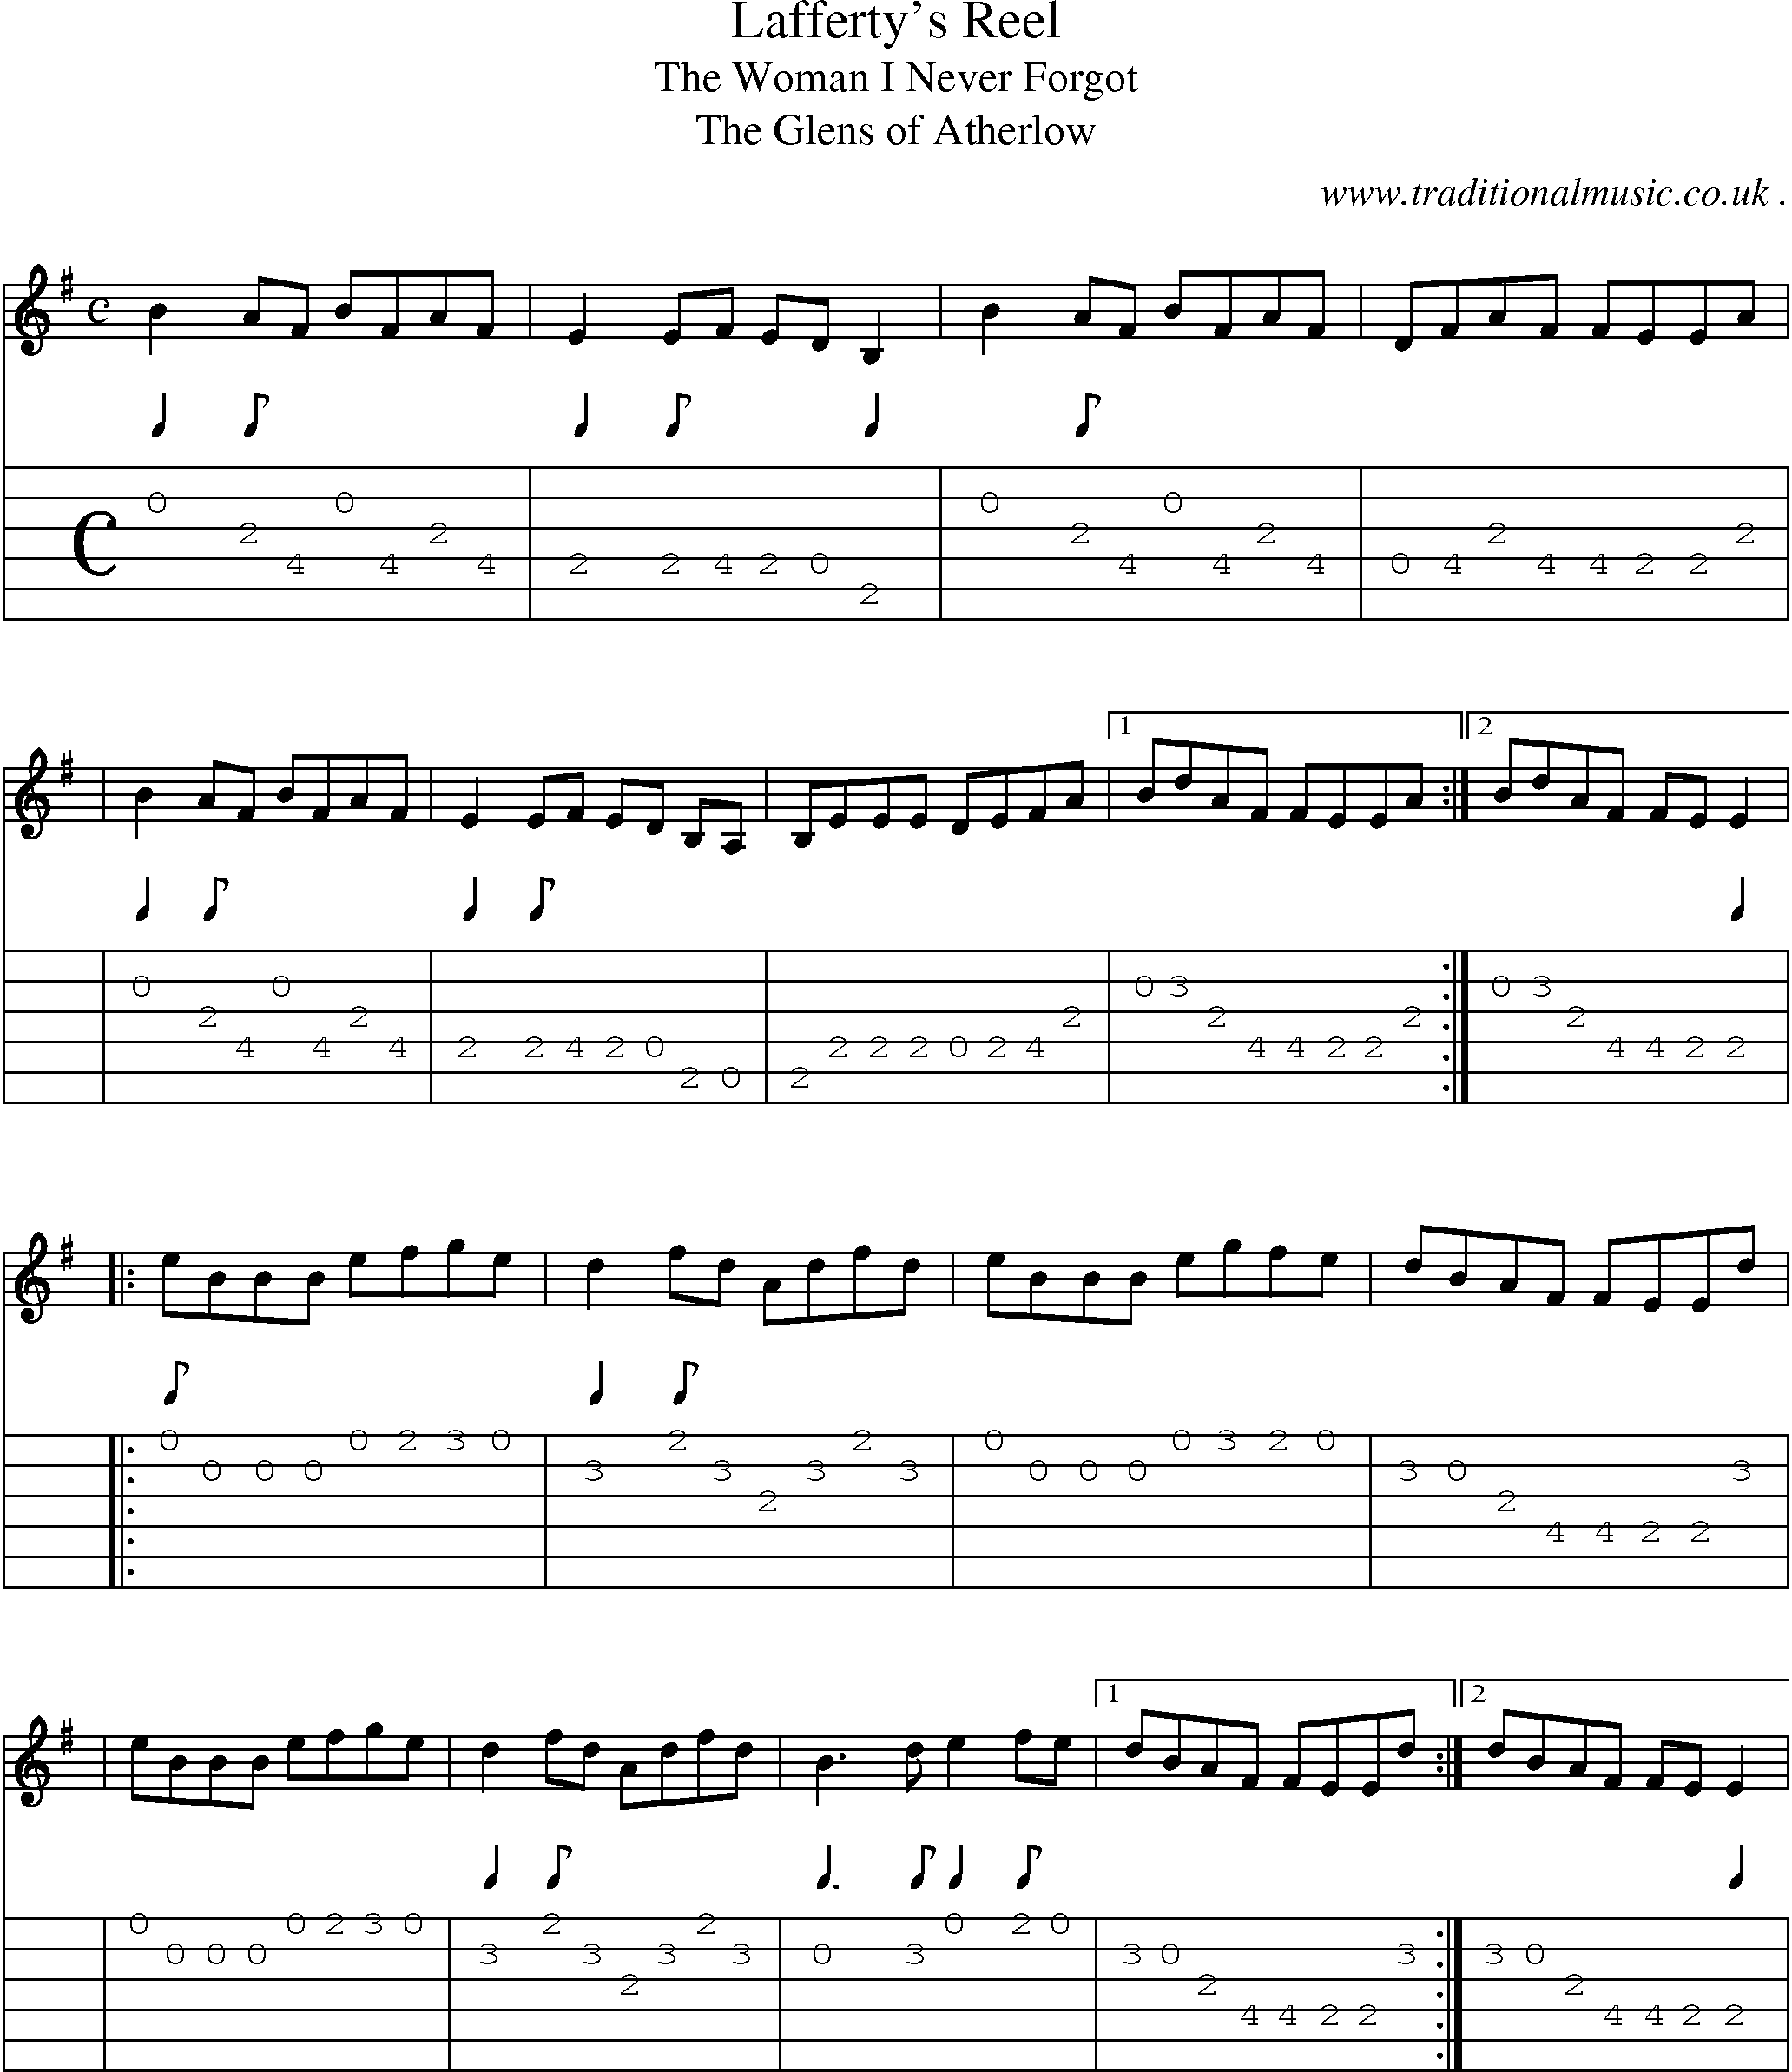 Sheet-Music and Guitar Tabs for Laffertys Reel